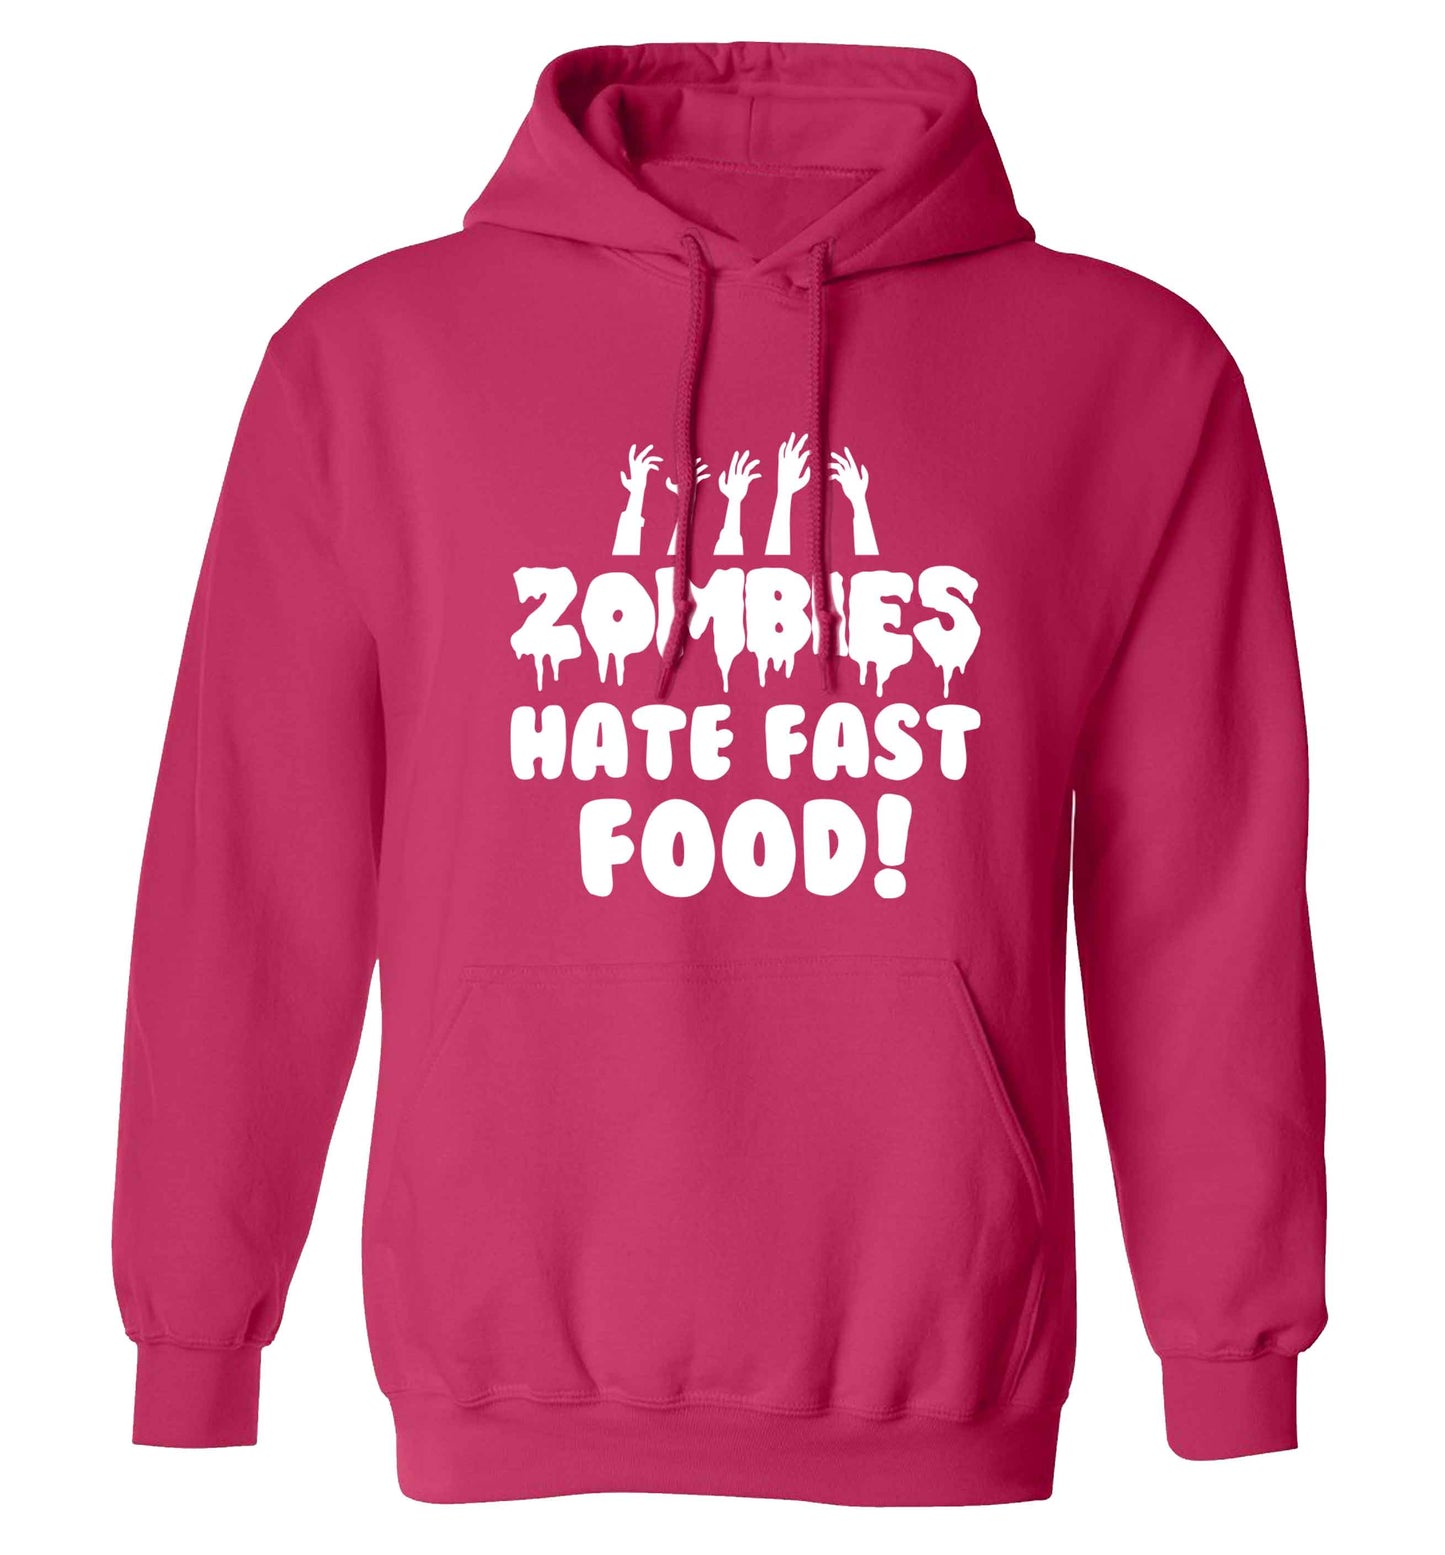 Zombies hate fast food adults unisex pink hoodie 2XL